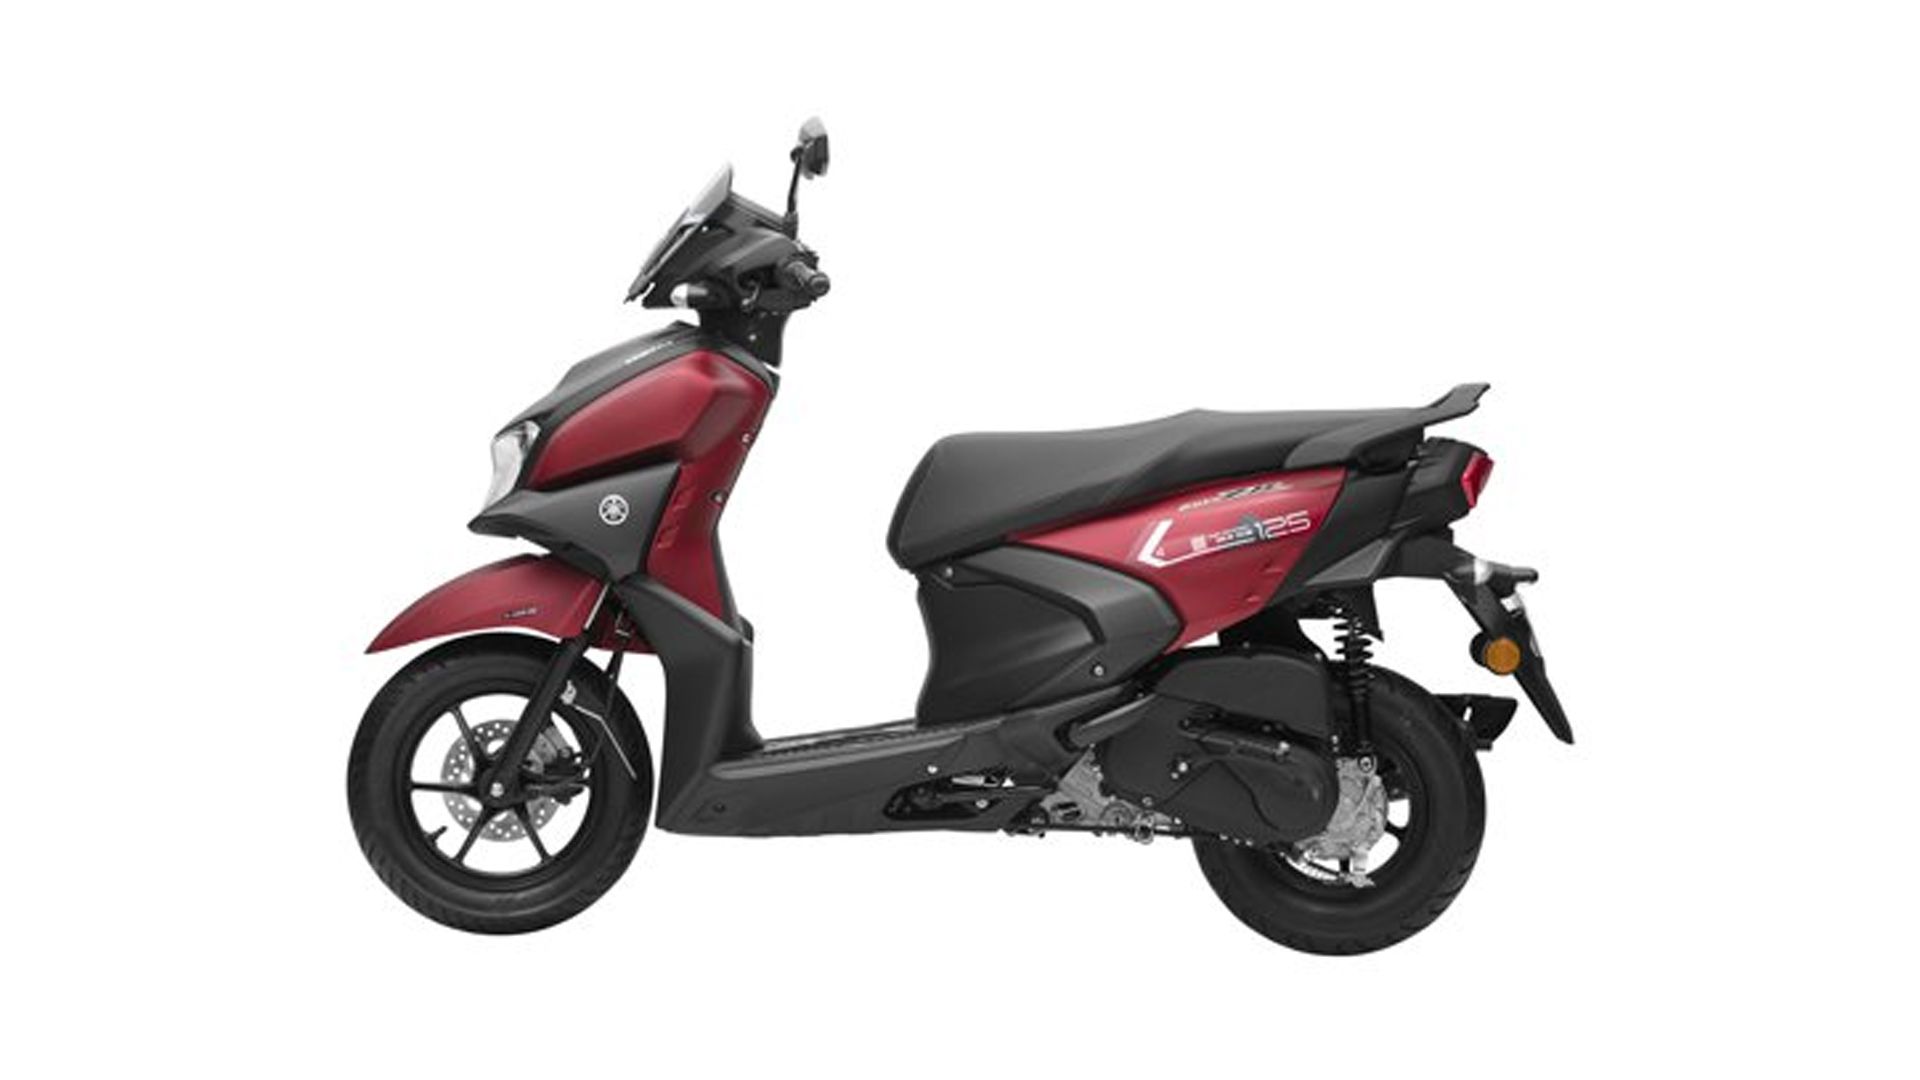 Yamaha Ray ZR 125 Fi 2020 Disc, Mileage, Reviews, Specification, Gallery